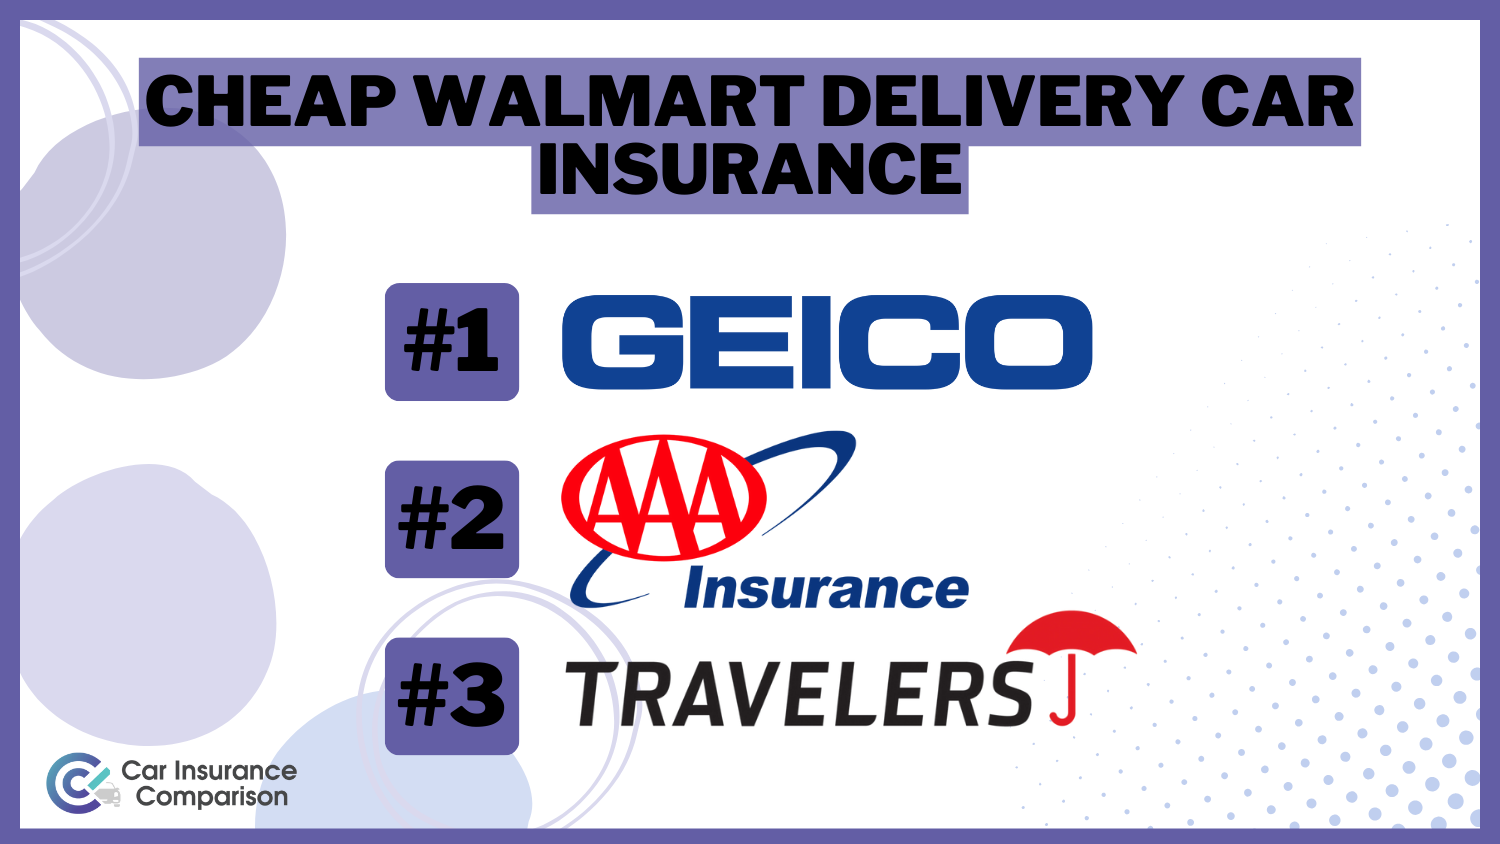 Cheap Walmart Delivery Car Insurance: Geico, AAA, and Travelers